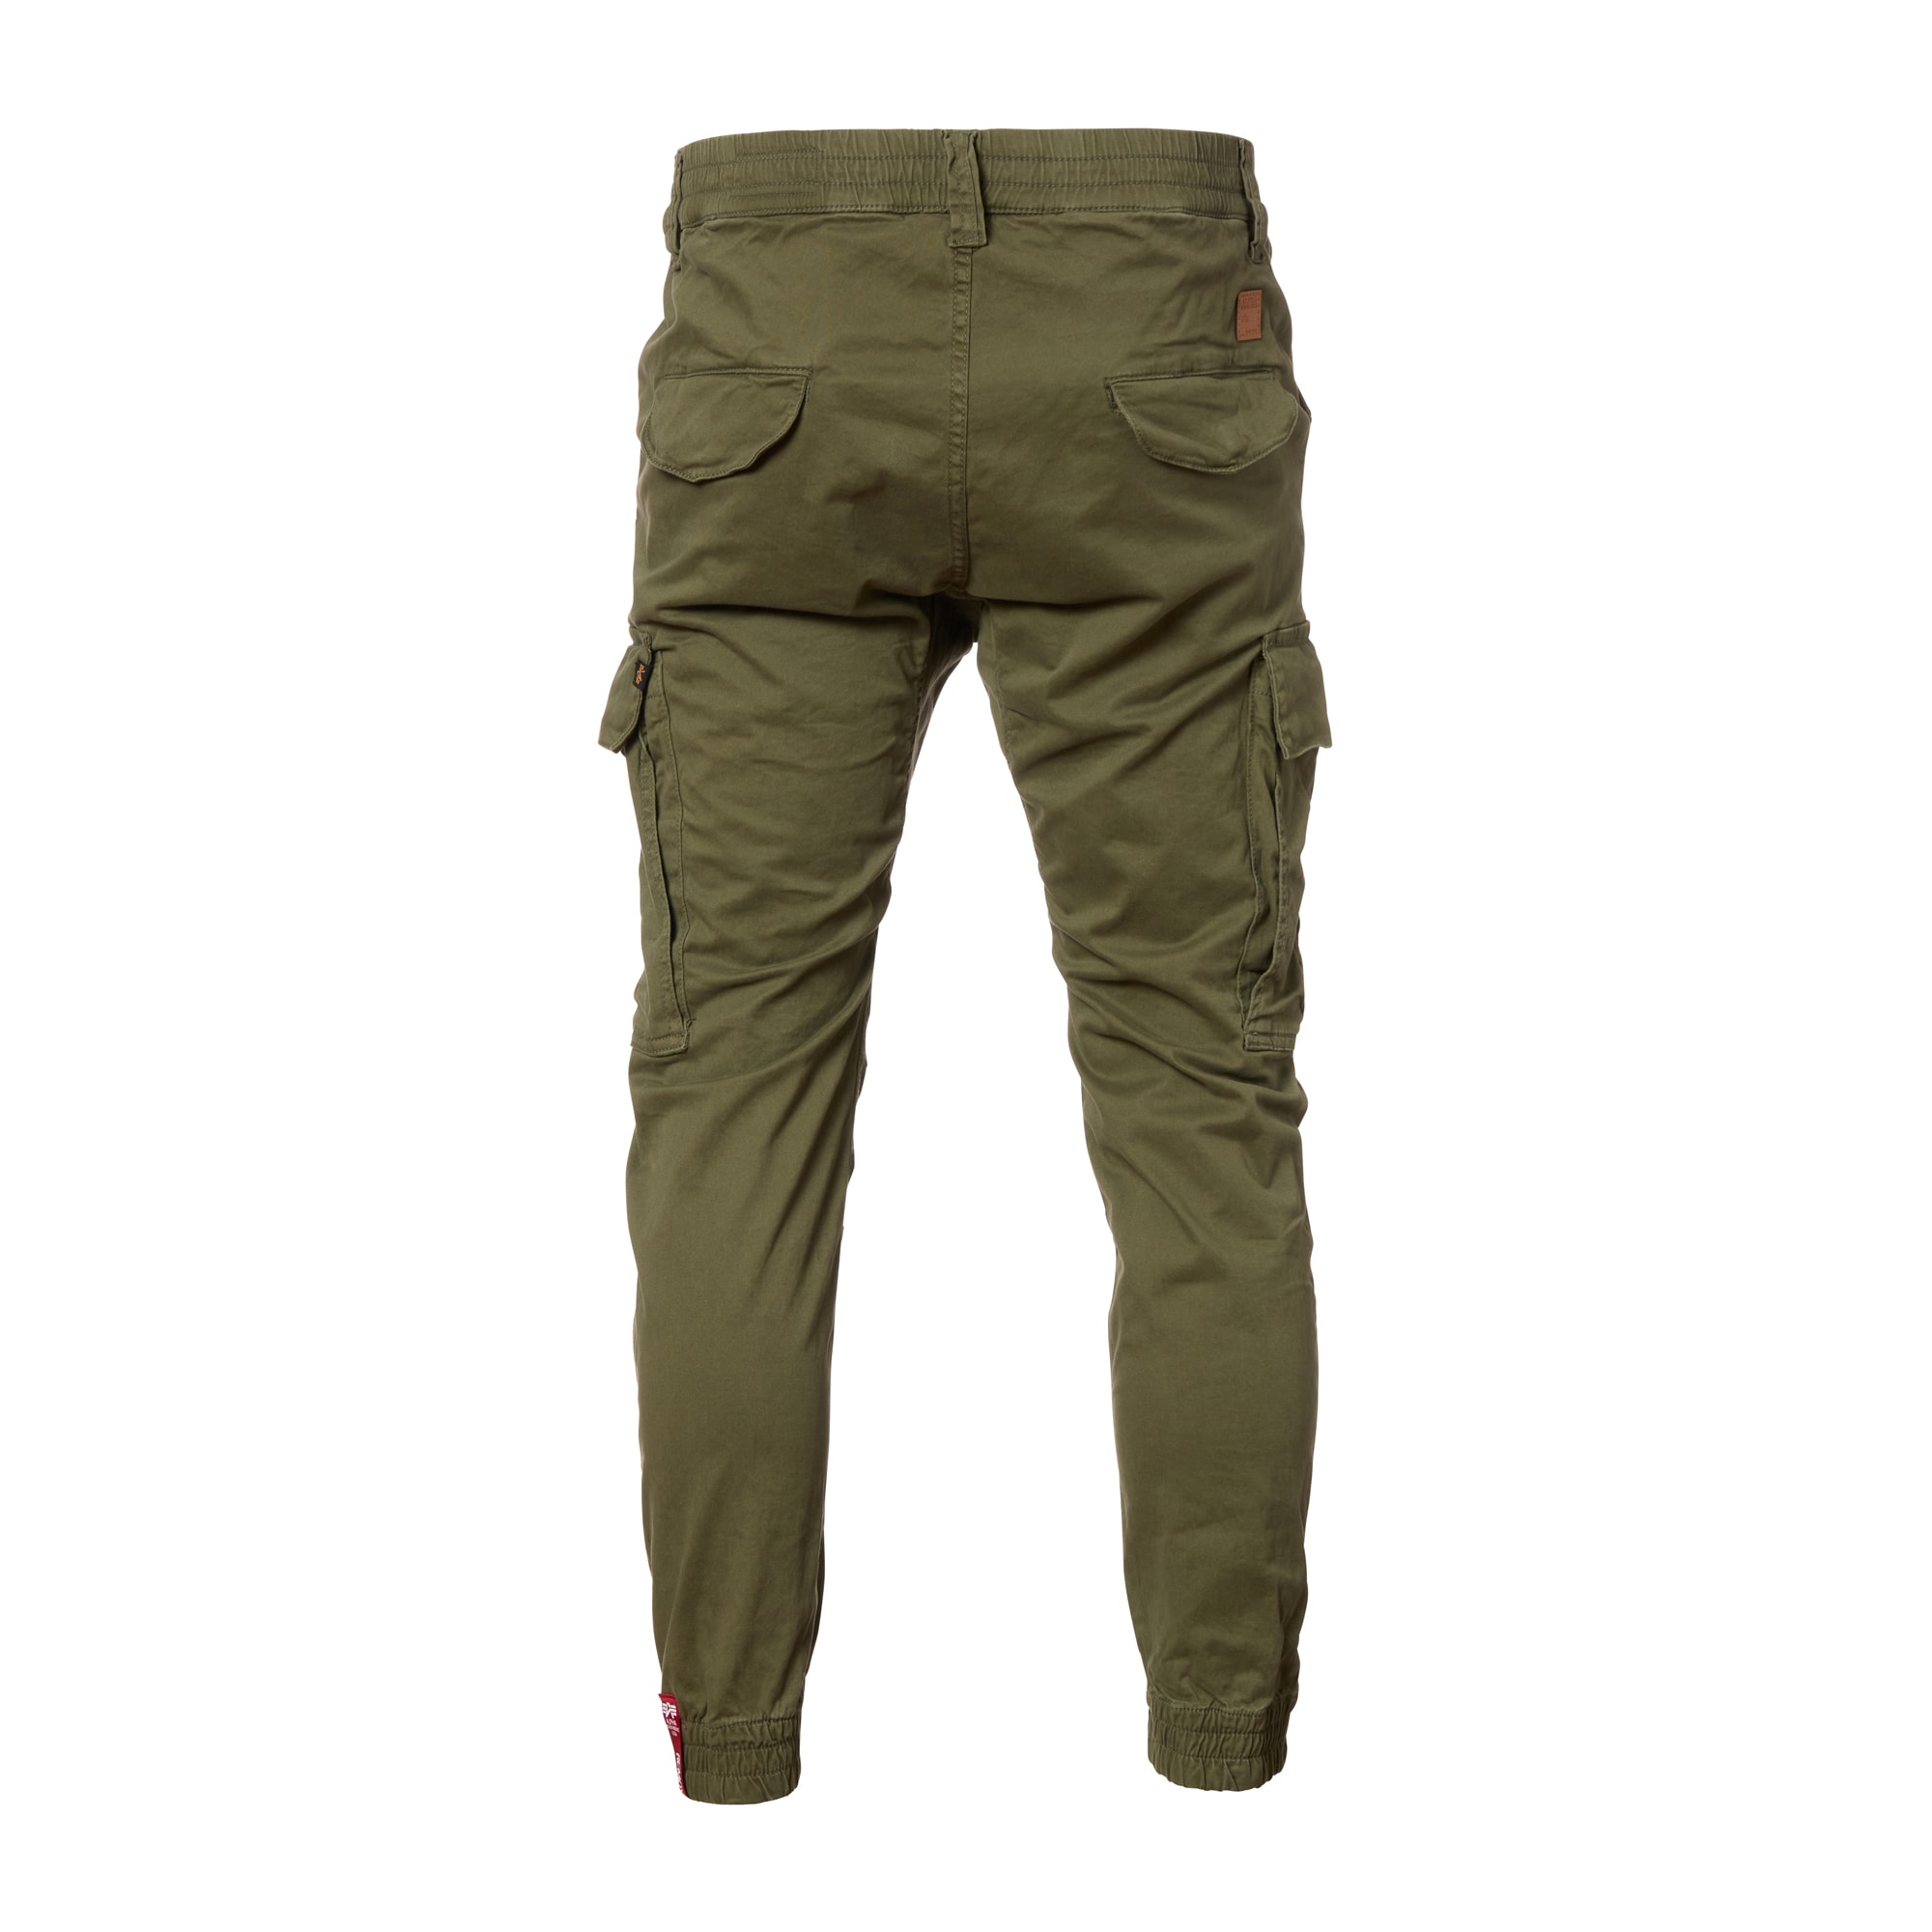 Purchase the Alpha ASMC Pants olive Airman by dark Industries